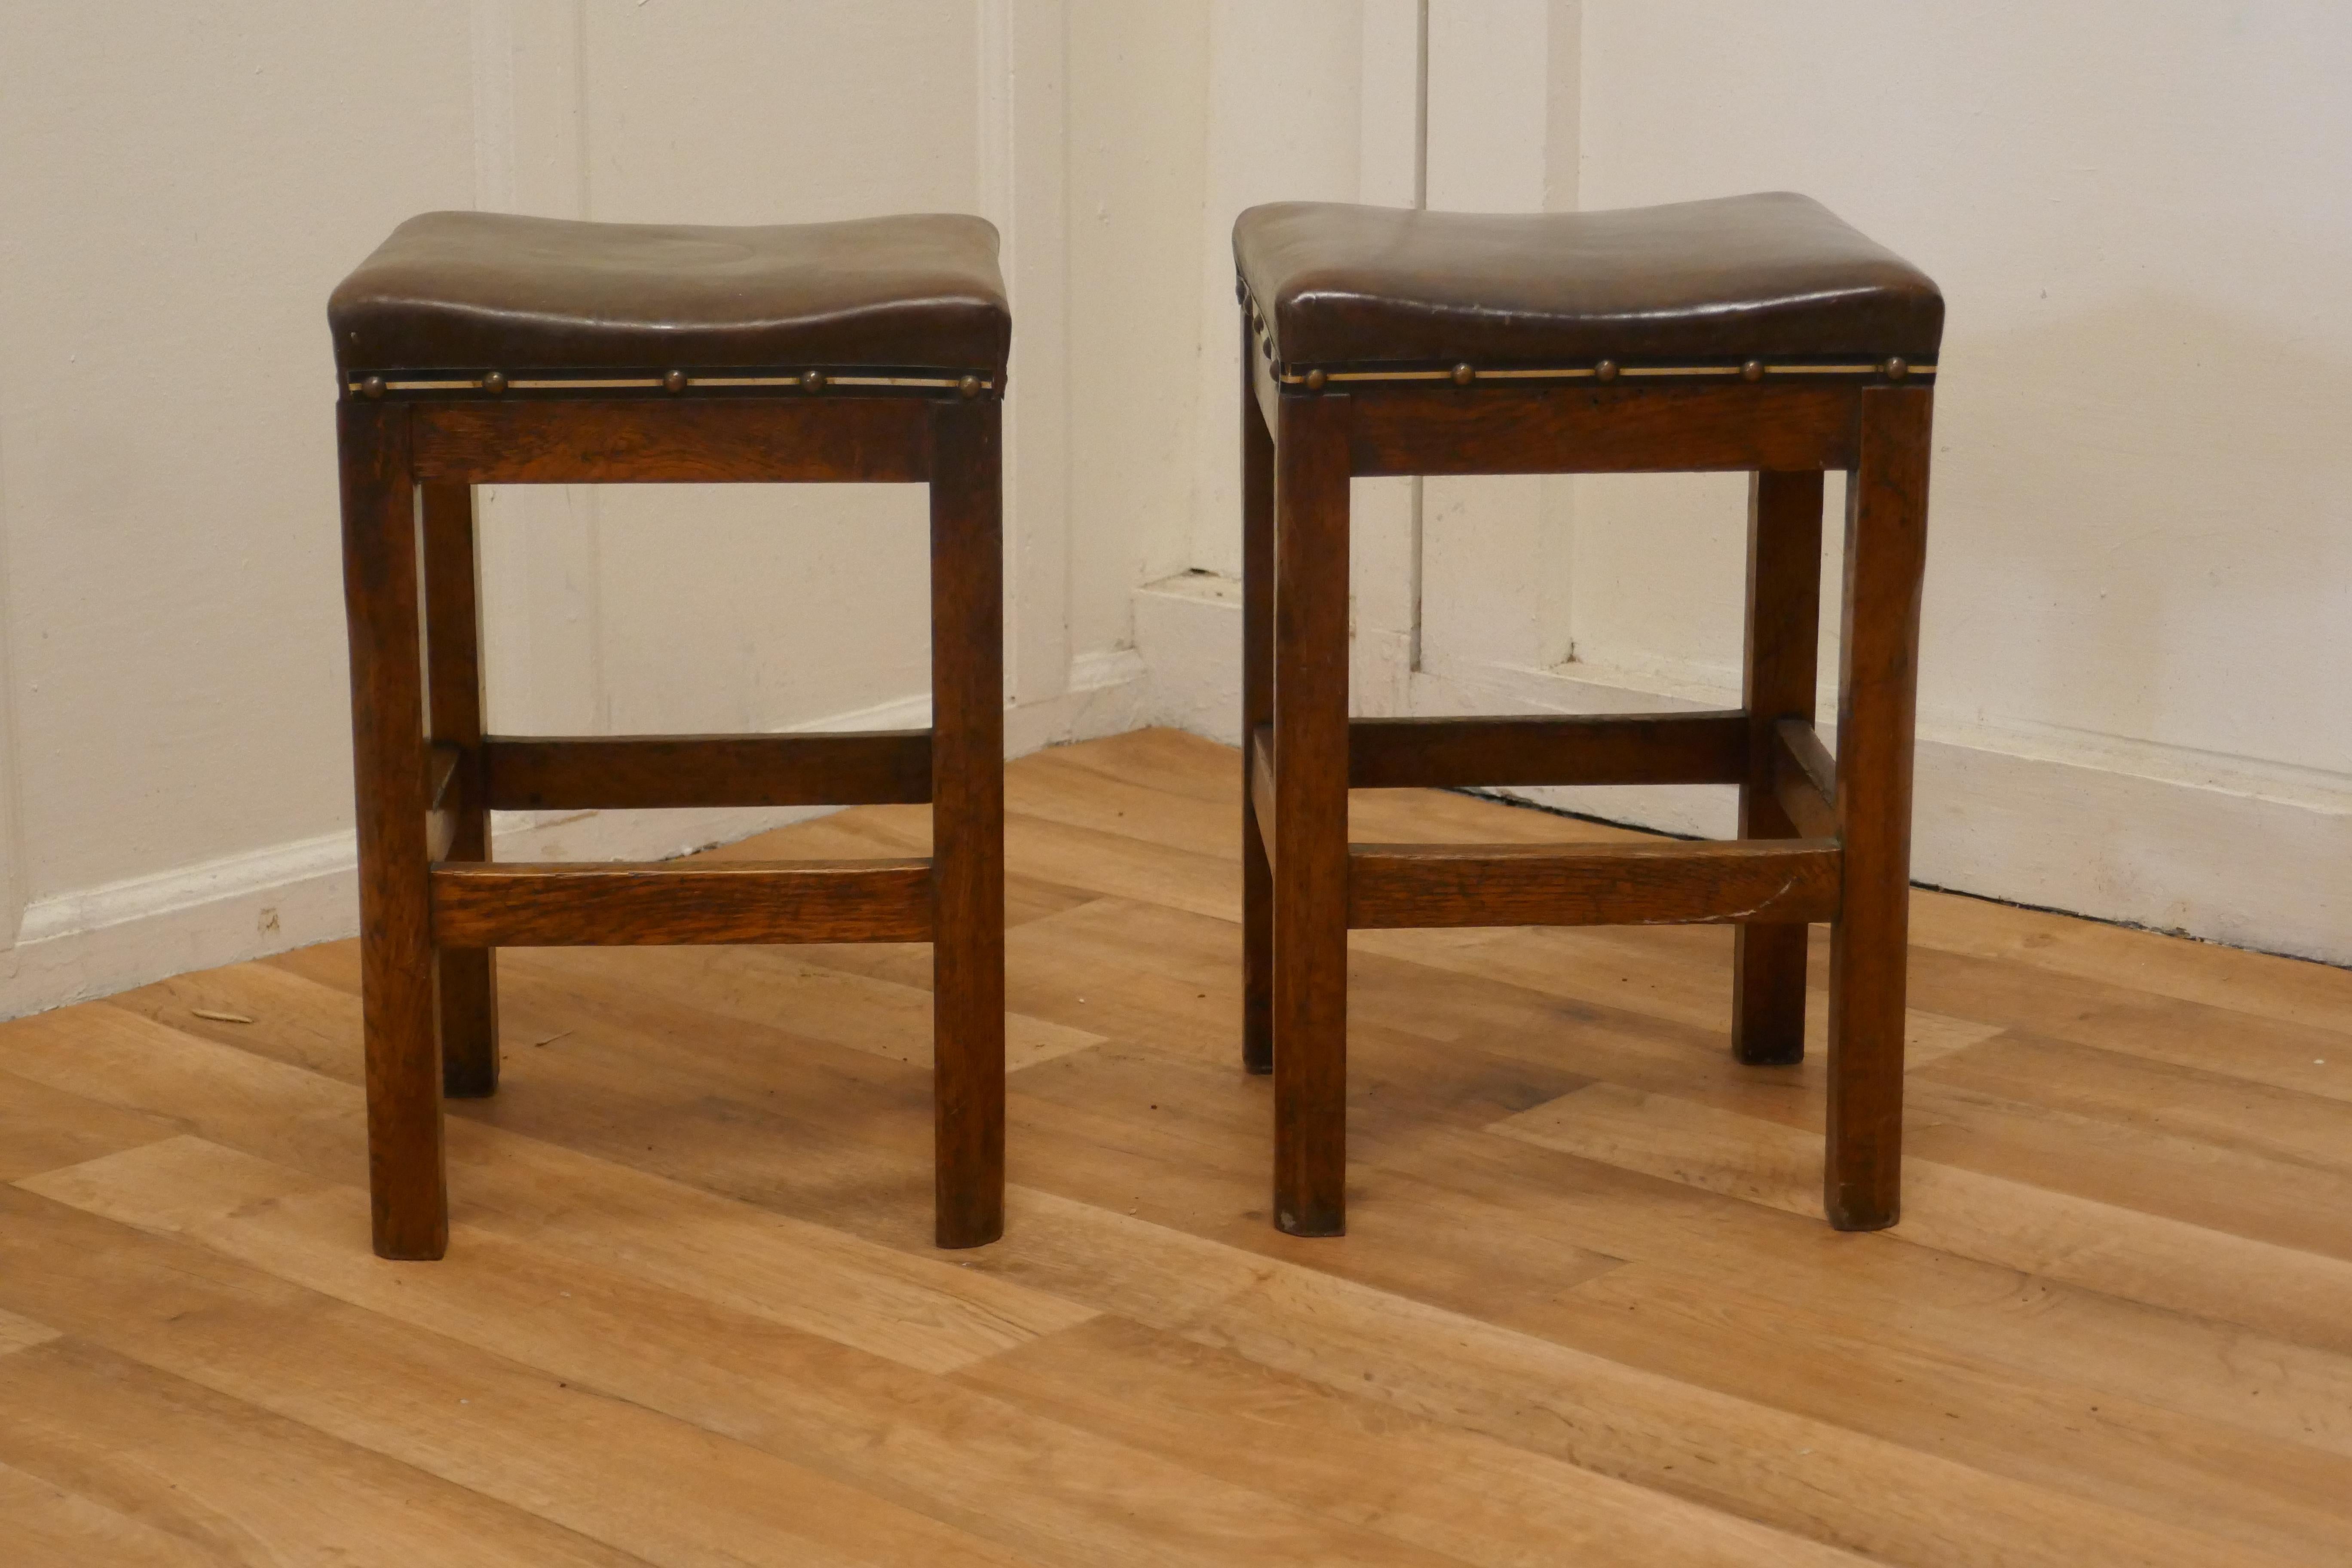 A pair of arts and crafts golden oak and leather stools

These are a very attractive pair they have a square seat and are set on sturdy stretchered legs 
The stools are in good sound condition, and have a pleasantly aged patina
 The stools are